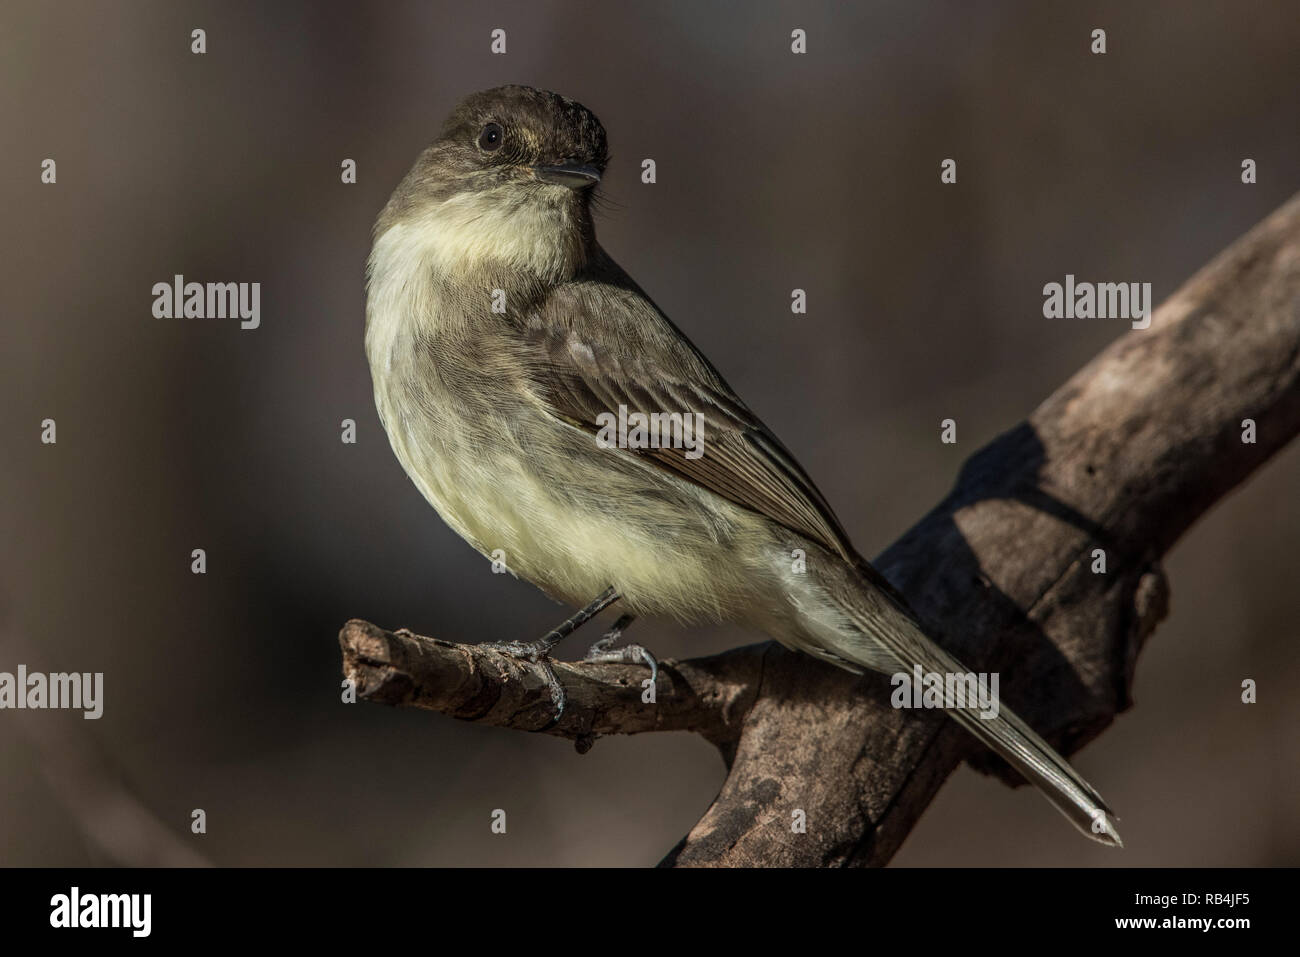 A eastern phoebe perched in the outskirts of Atlanta near Marietta in Georgia on a cold winter day. Stock Photo